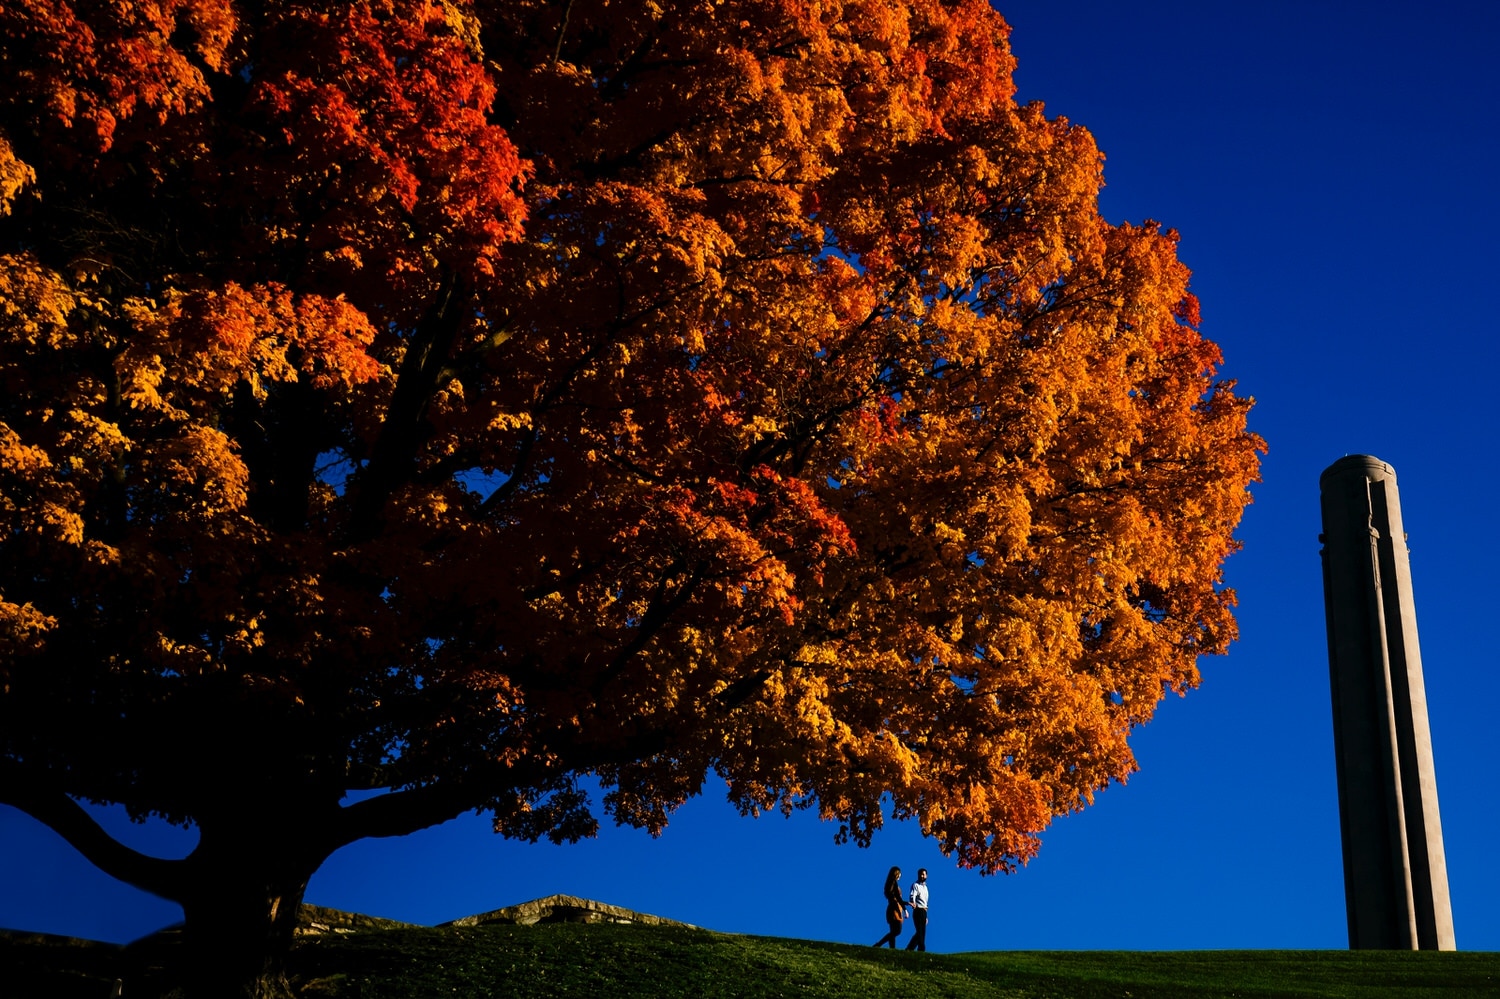 A vibrant picture, taken from a distance, of a vibrant orange tree at the base of Liberty Memorial Park, with a couple holding hands and walking across a hilltop underneath the tree, the pipe of Liberty Memorial visible in the background during a colorful fall engagement session in Kansas City. 